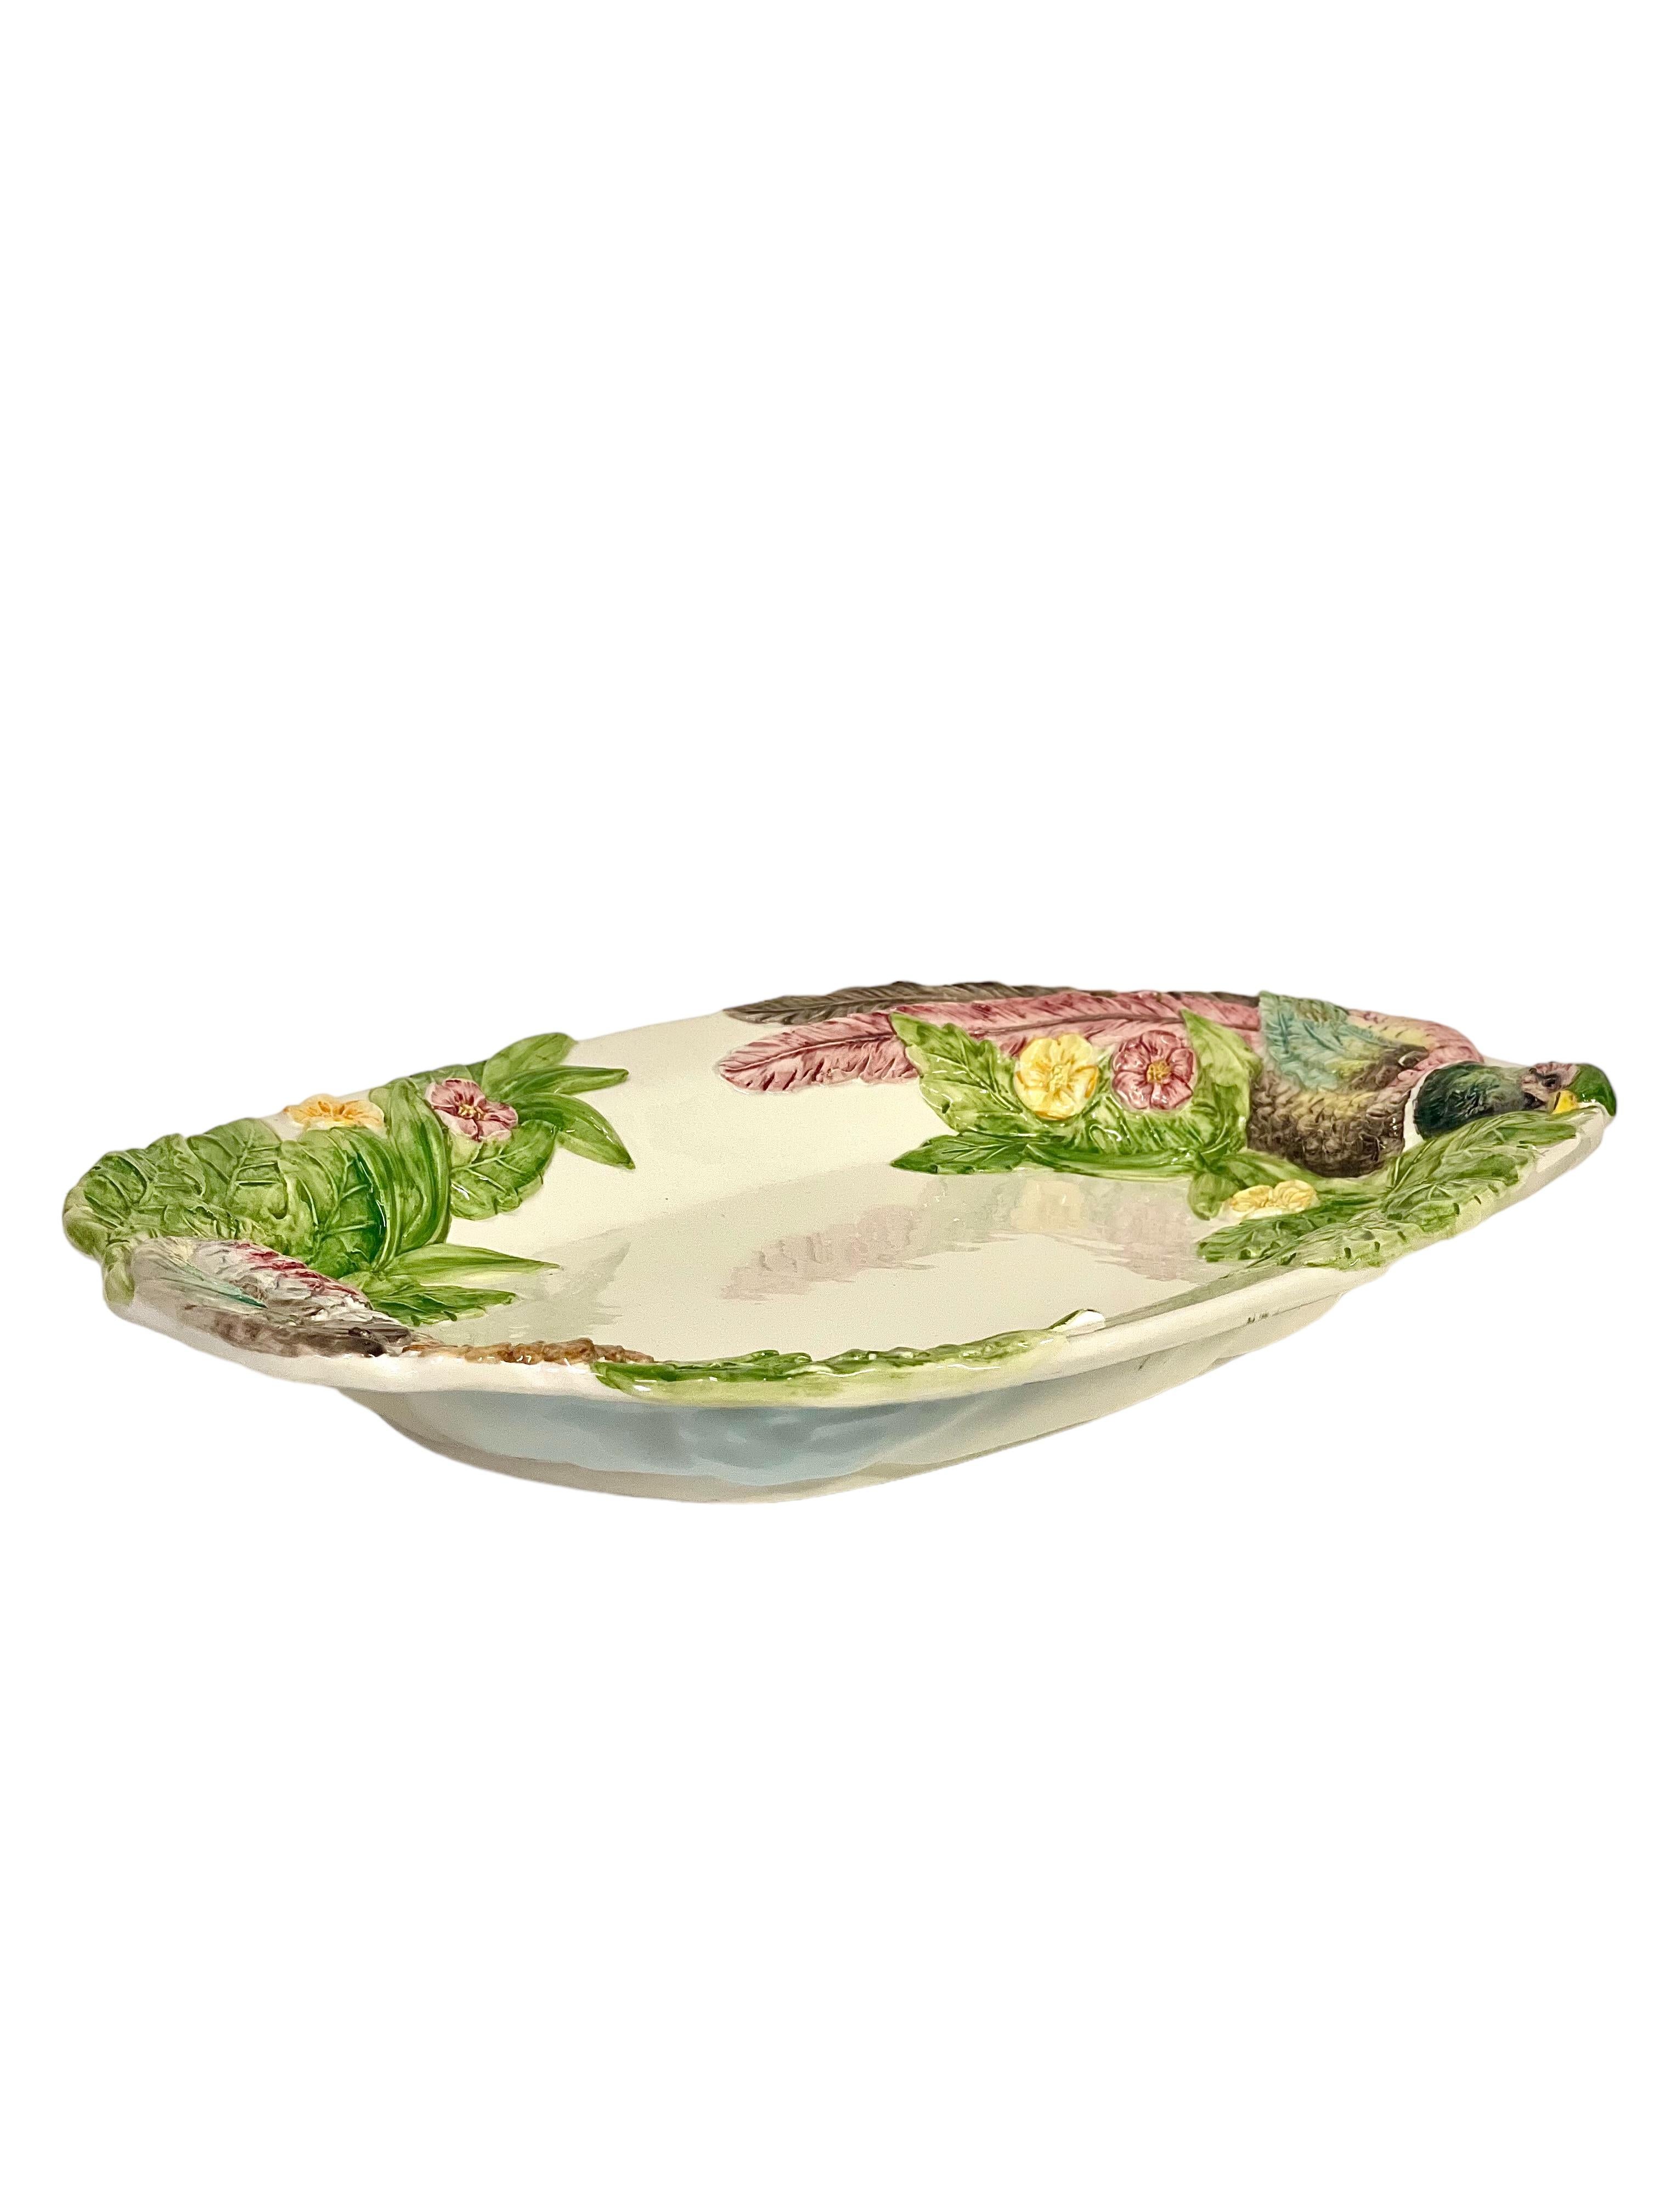 French Vintage Large Majolica Serving Platter with Handpainted Pheasant Designs For Sale 4